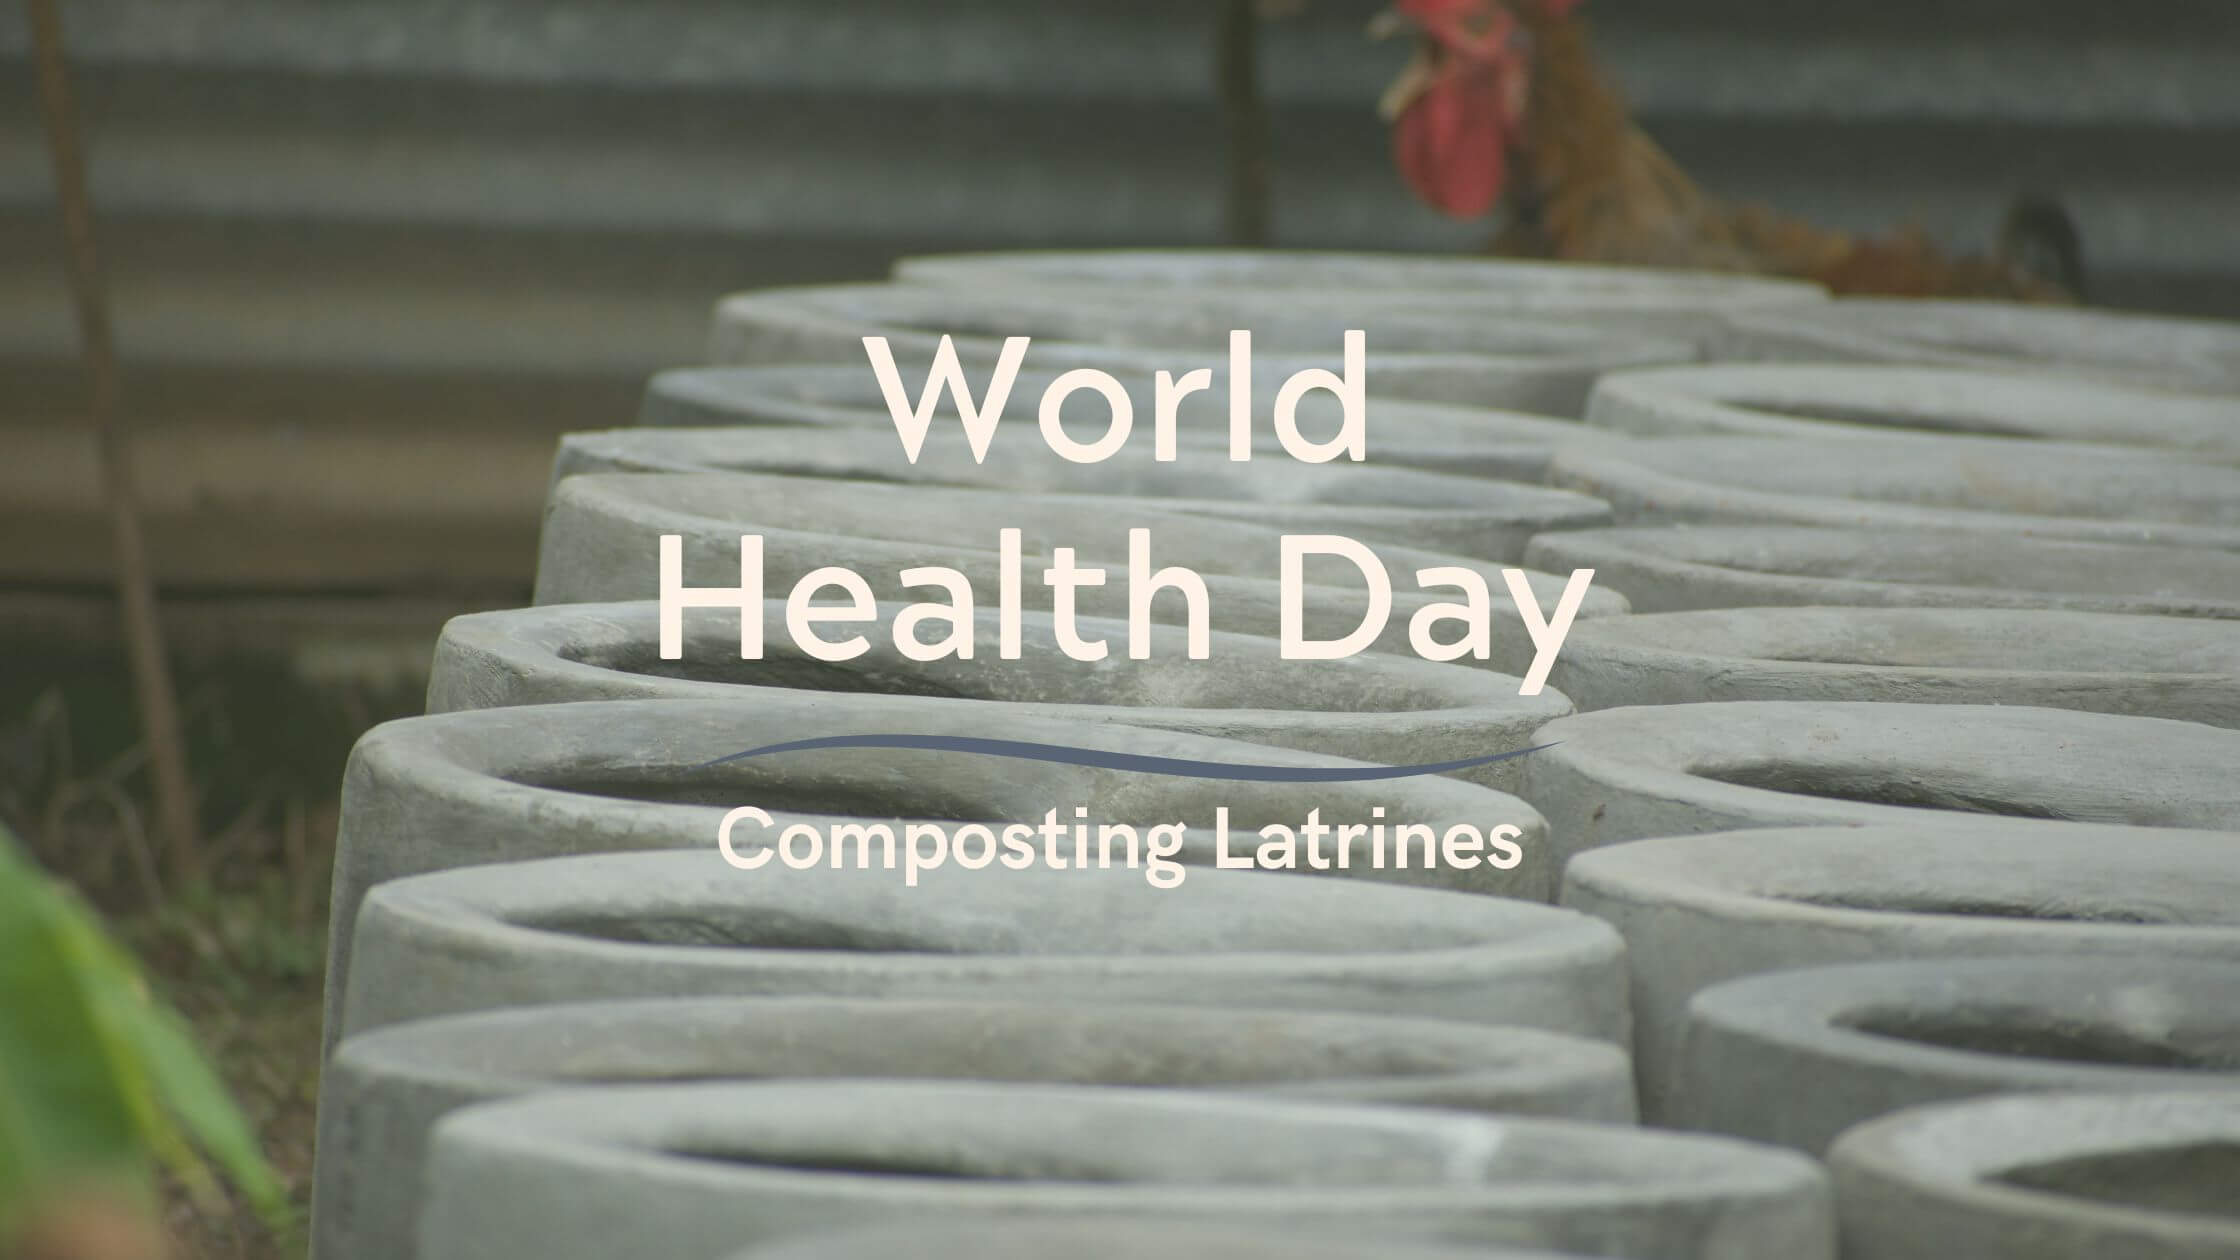 Transforming Lives Through Composting Latrines: A Story of Hope, Dignity, and Community Unity